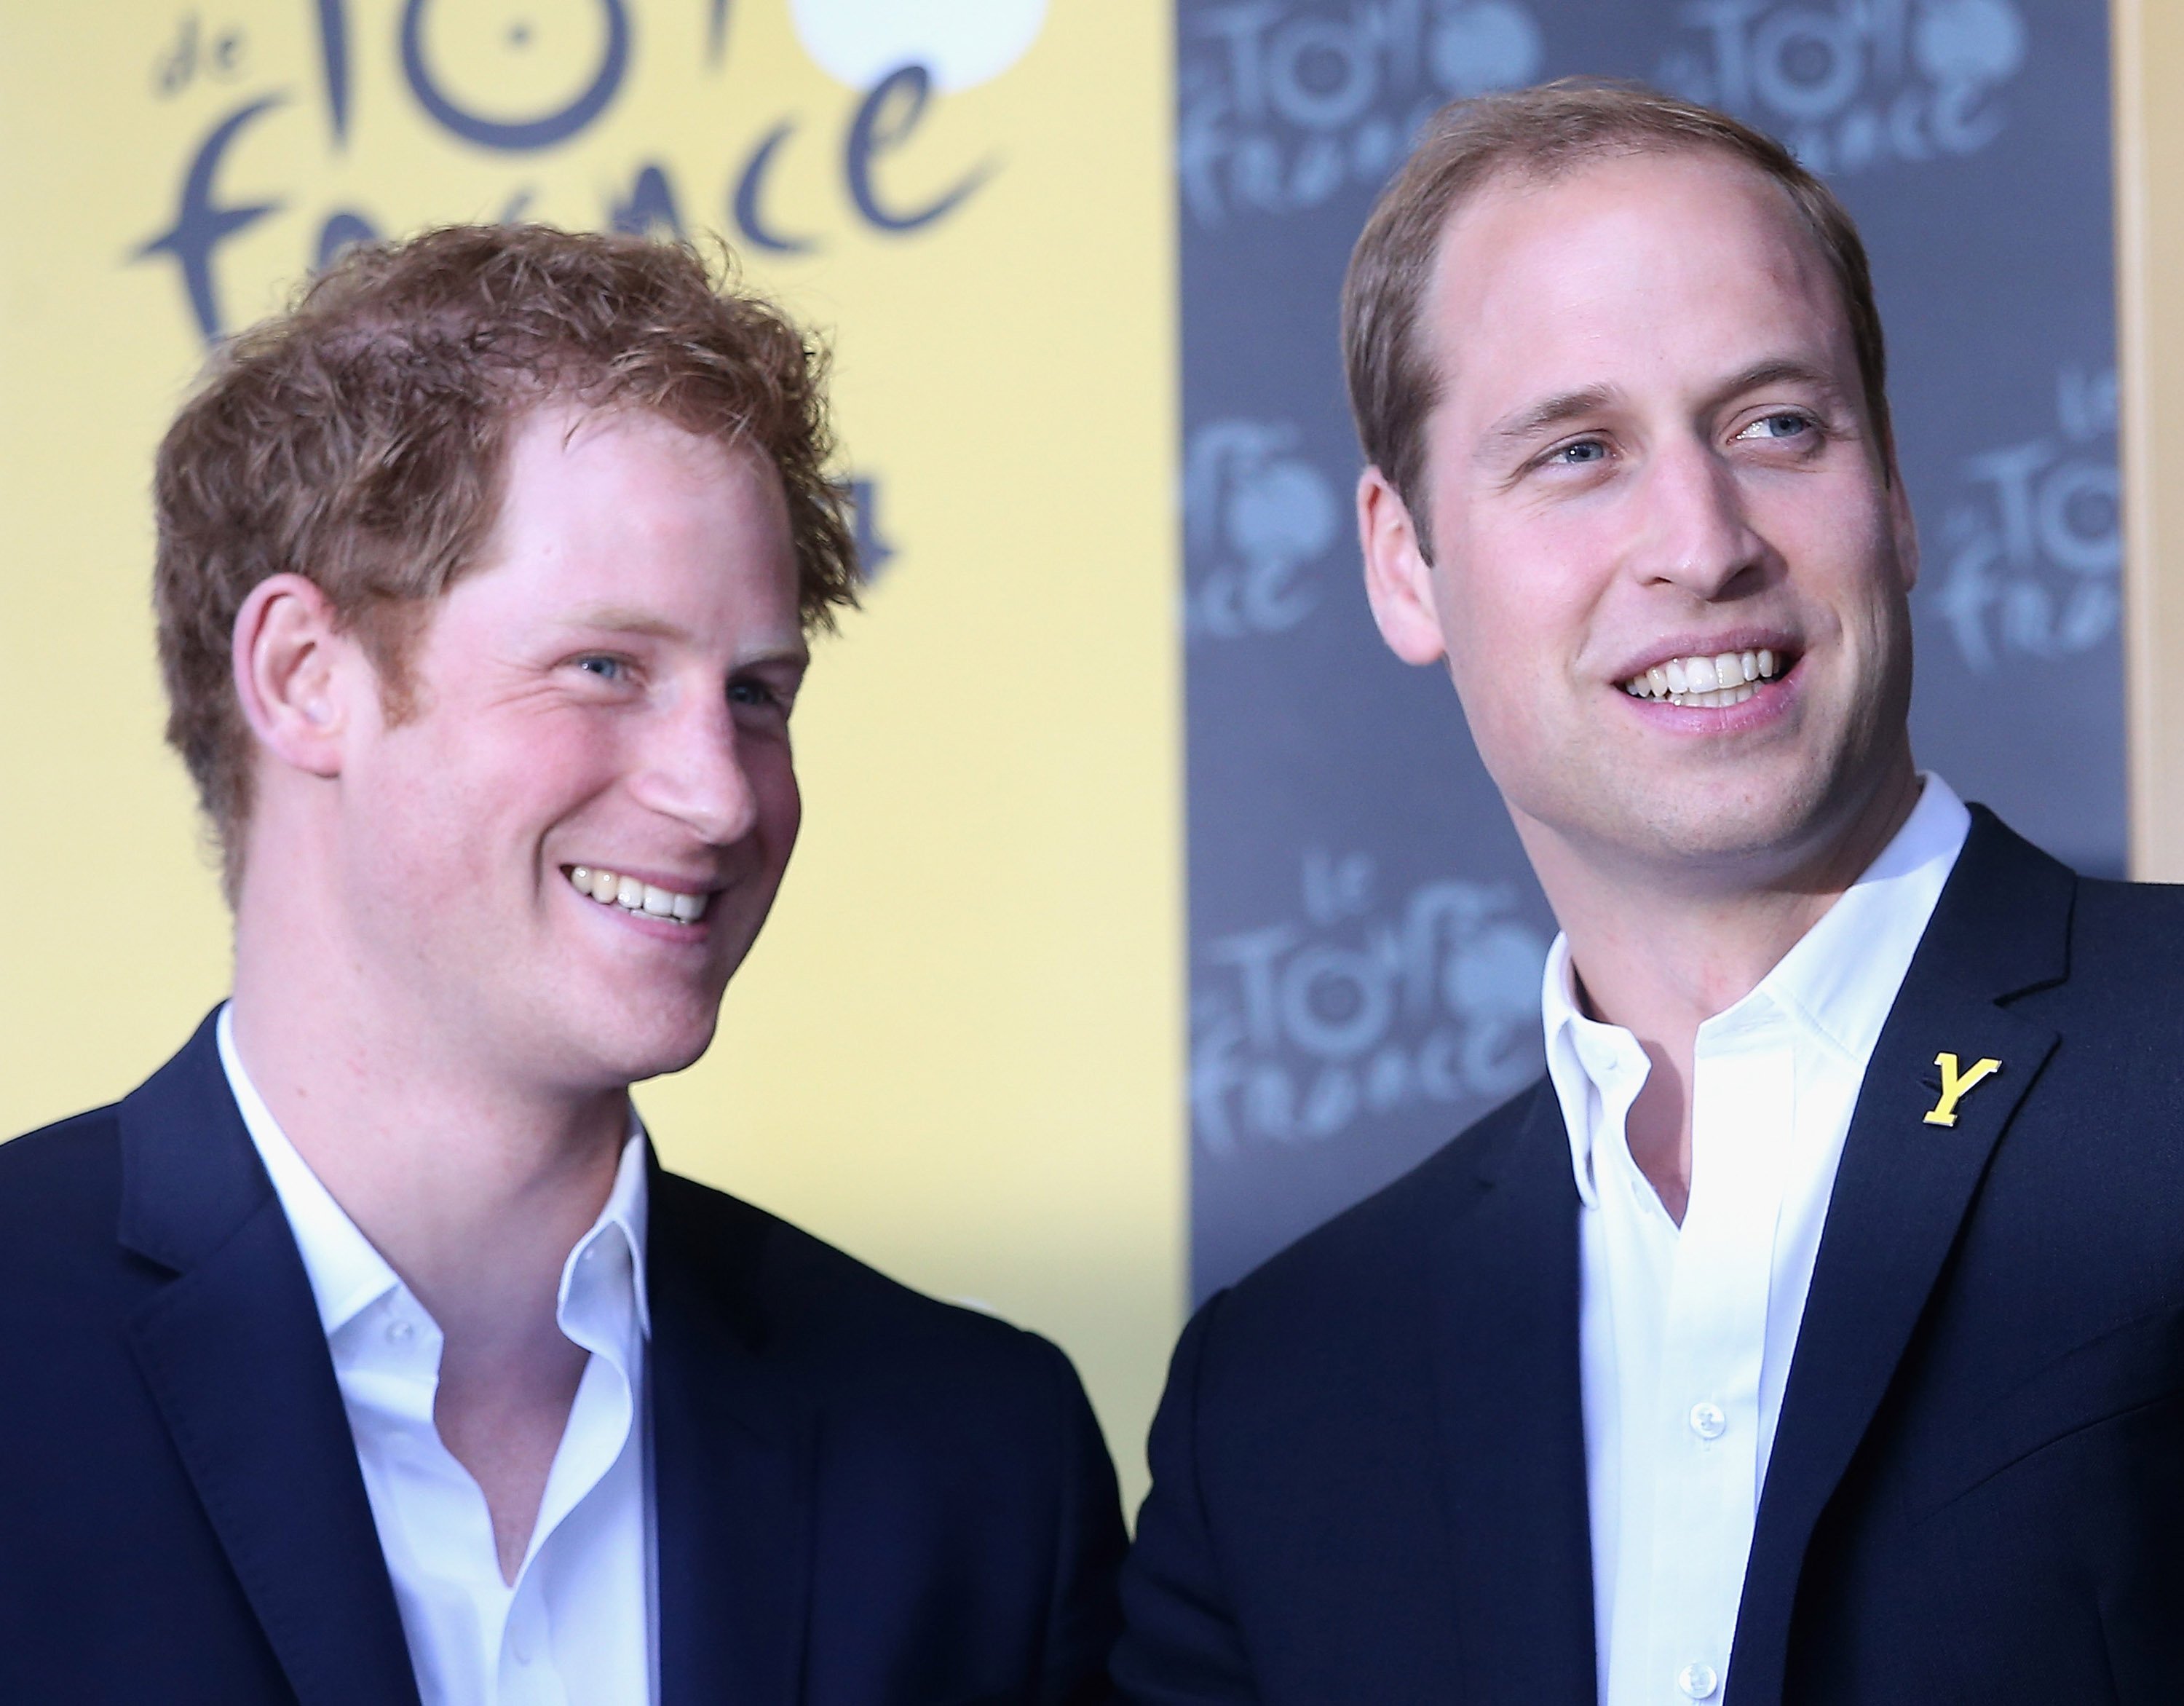 Prince Harry and Prince William pictured laughing together on the podium after Stage 1 of the Tour De France on July 5, 2014 in Harrogate, United Kingdom. | Source: Getty Images